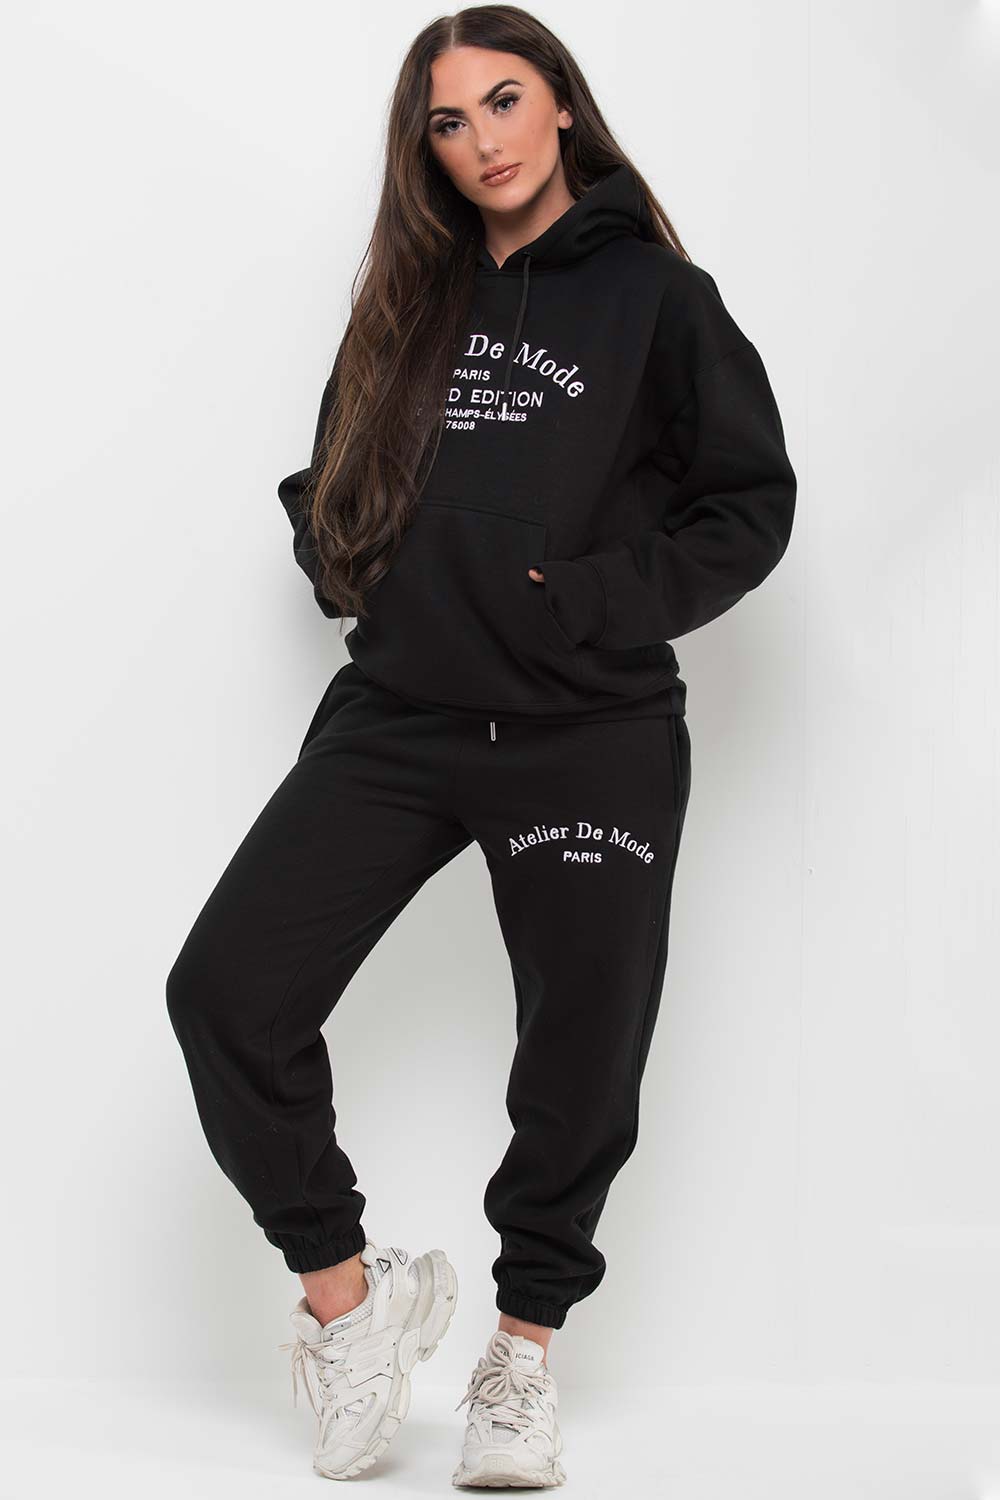 Black Hoodie and Joggers Loungewear Set Limited Edition Slogan –